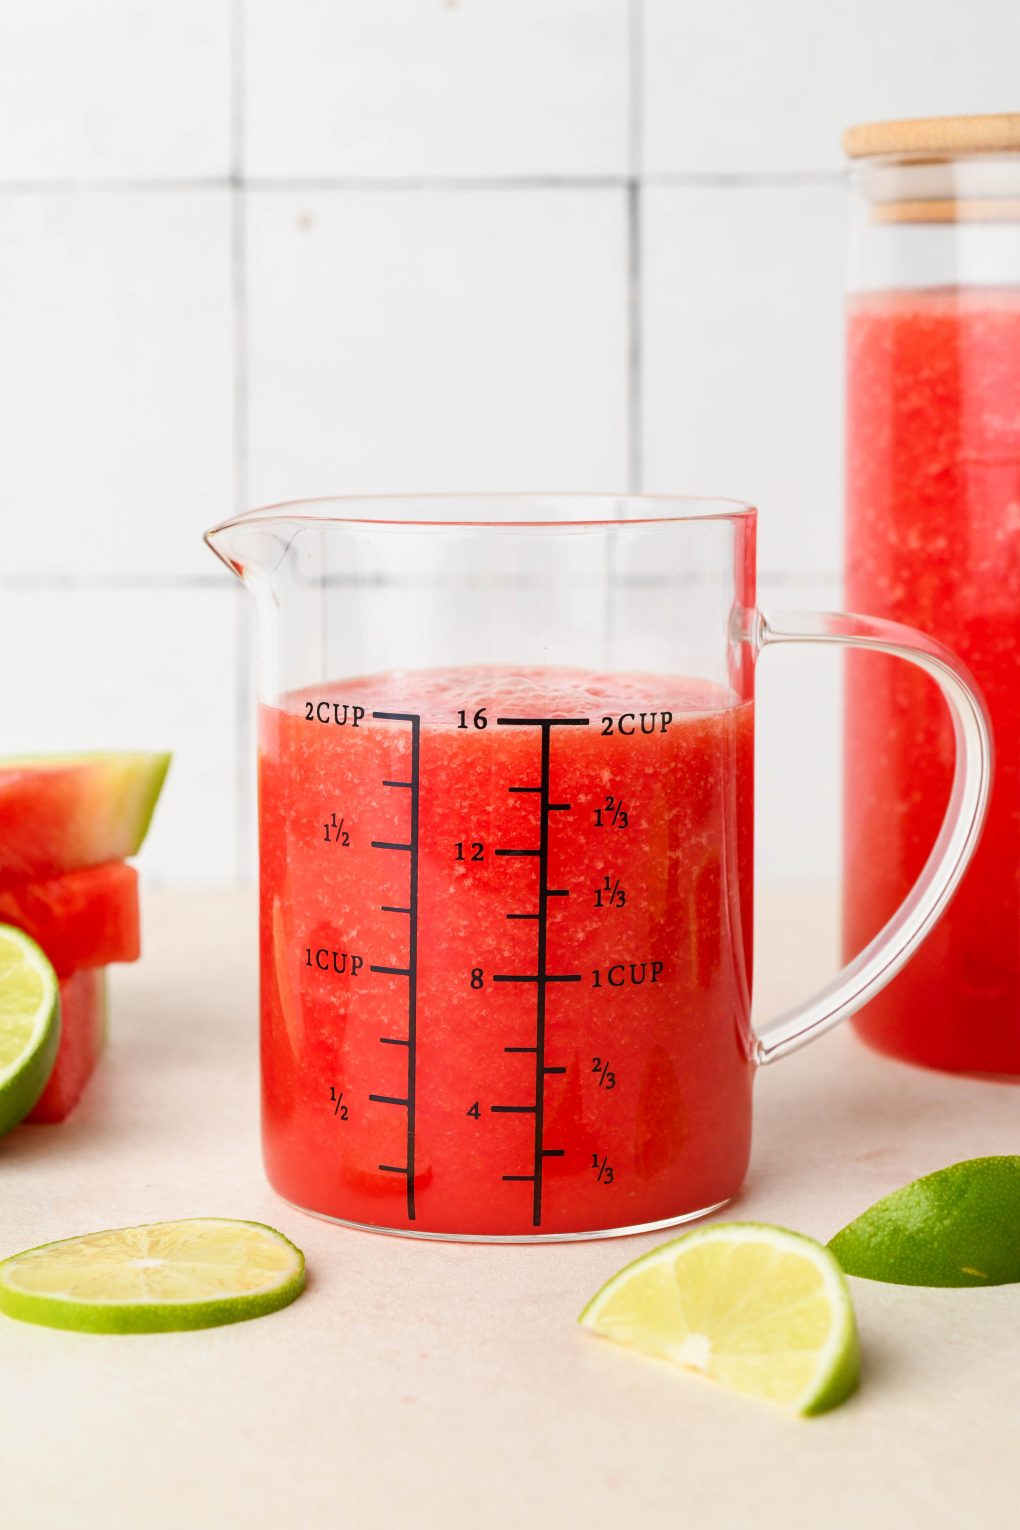 Watermelon juice in a cute measuring glass, next to a larger jar also filled with juice. On a white background surrounded by lime wedges.